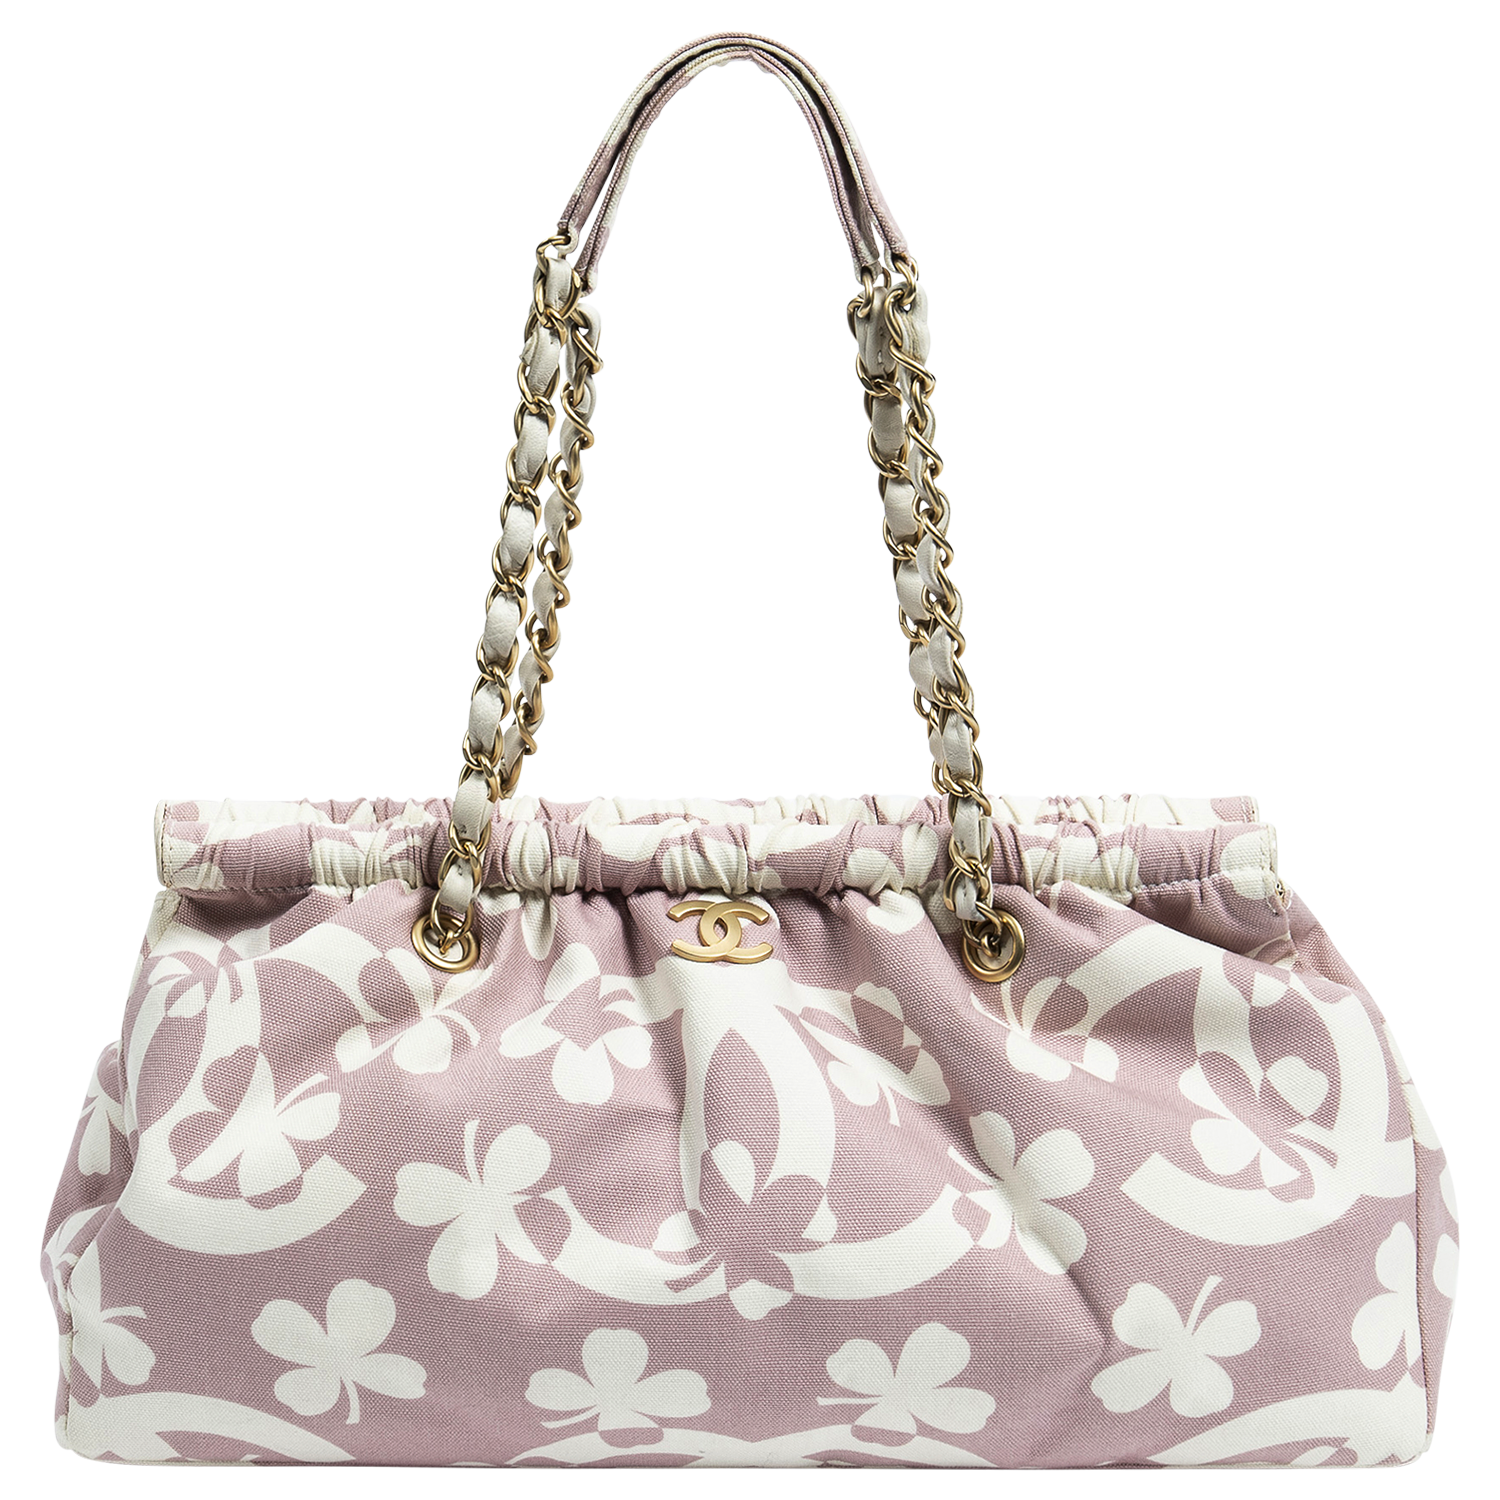 Chanel 2004 Pink Limited Edition Lucky Clover Shoulder Bag